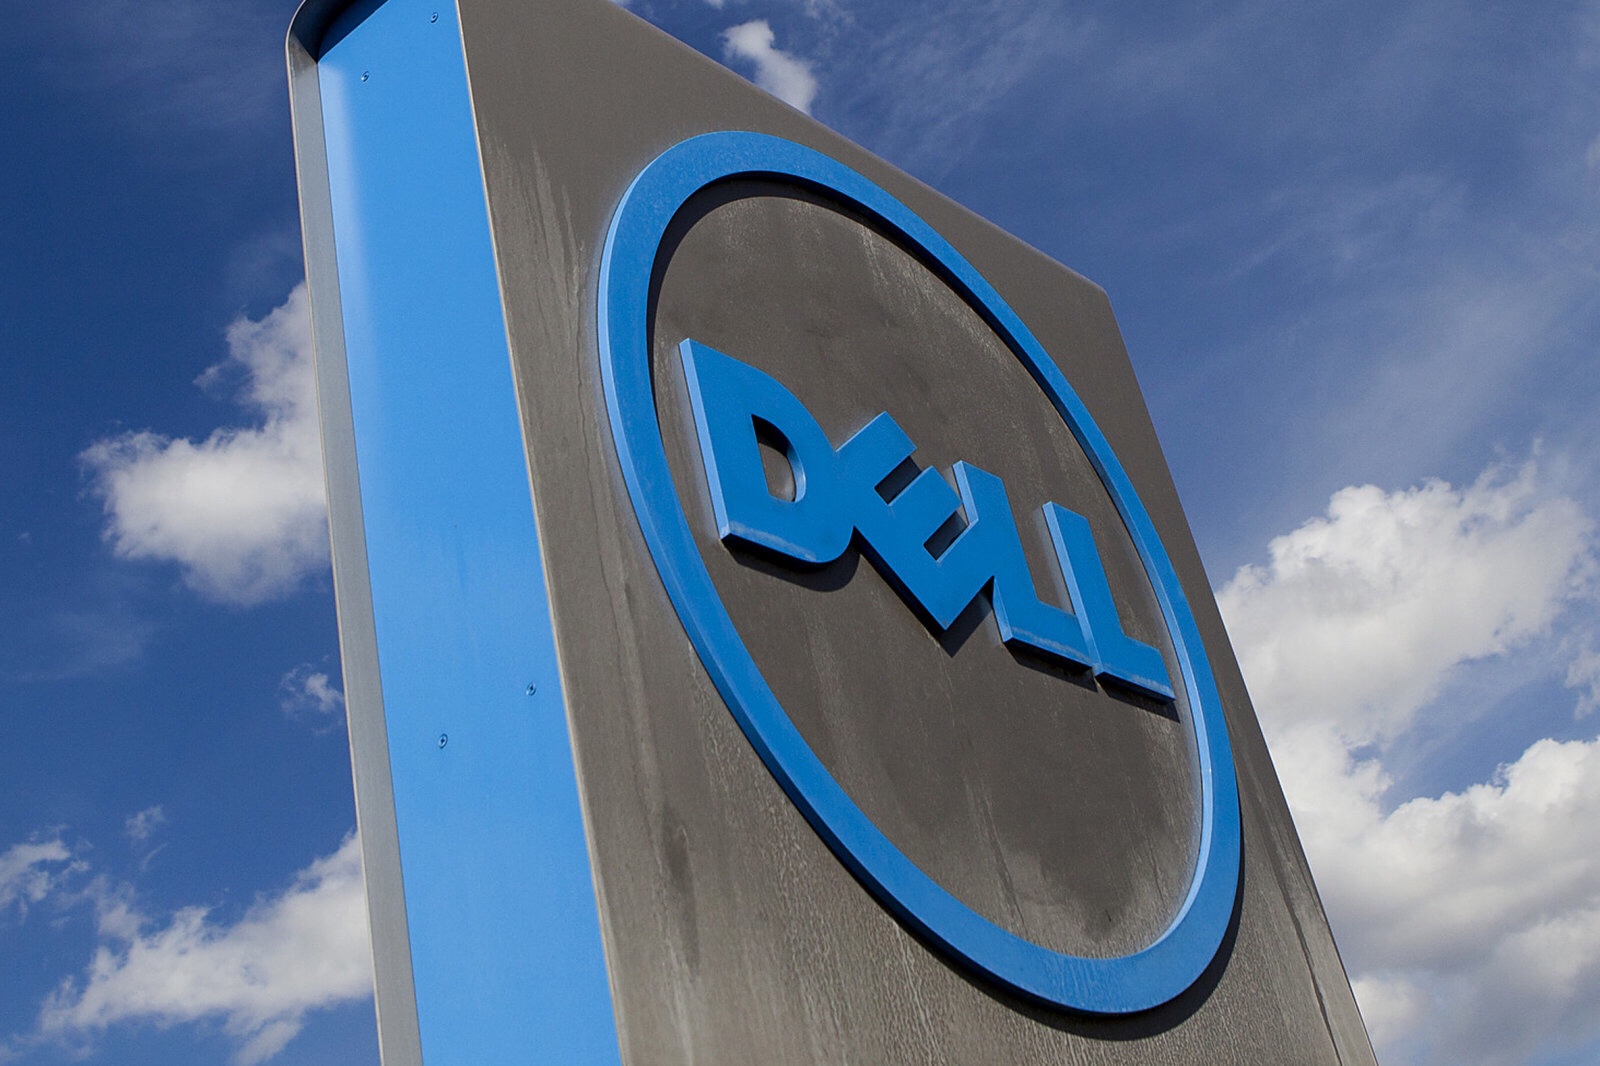 Dell is looking to sell itself to VMware, paving the way to become public again